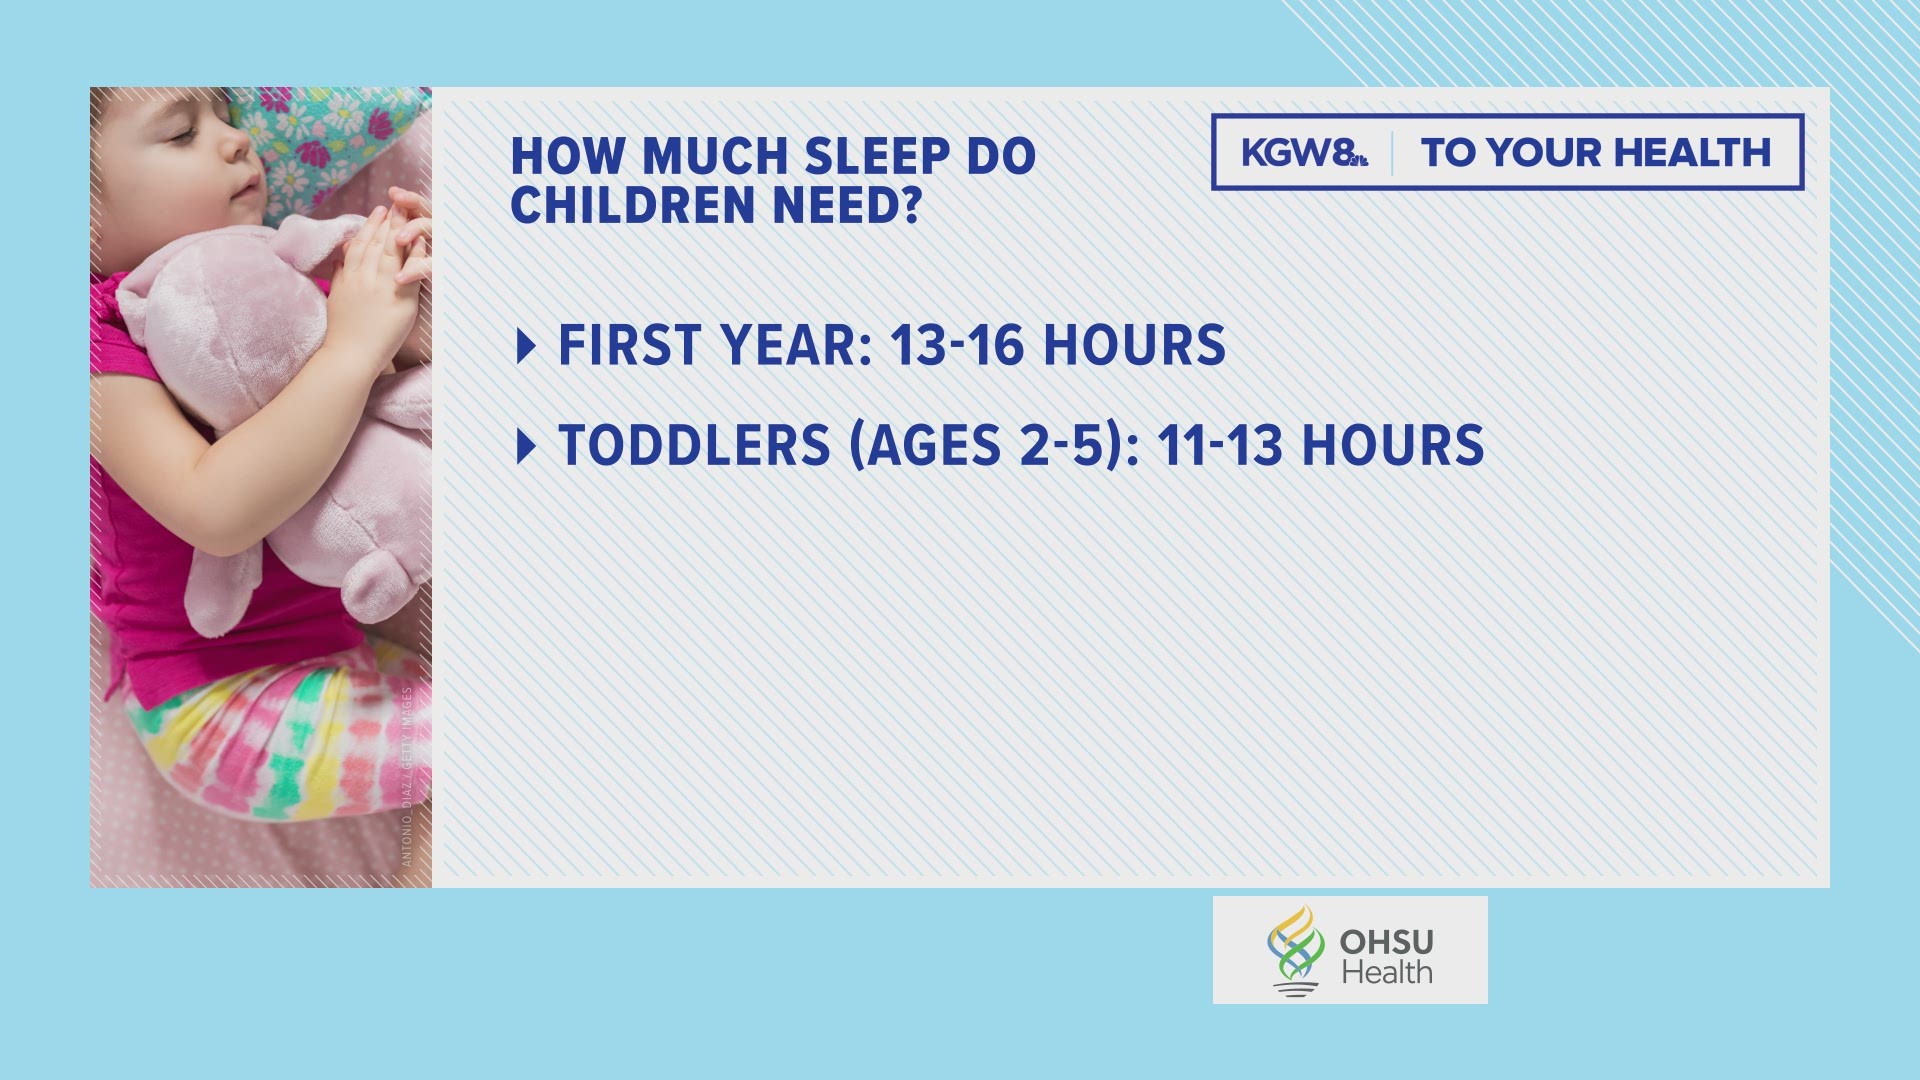 From OHSU Health, here is some information on how much sleep children need per day.